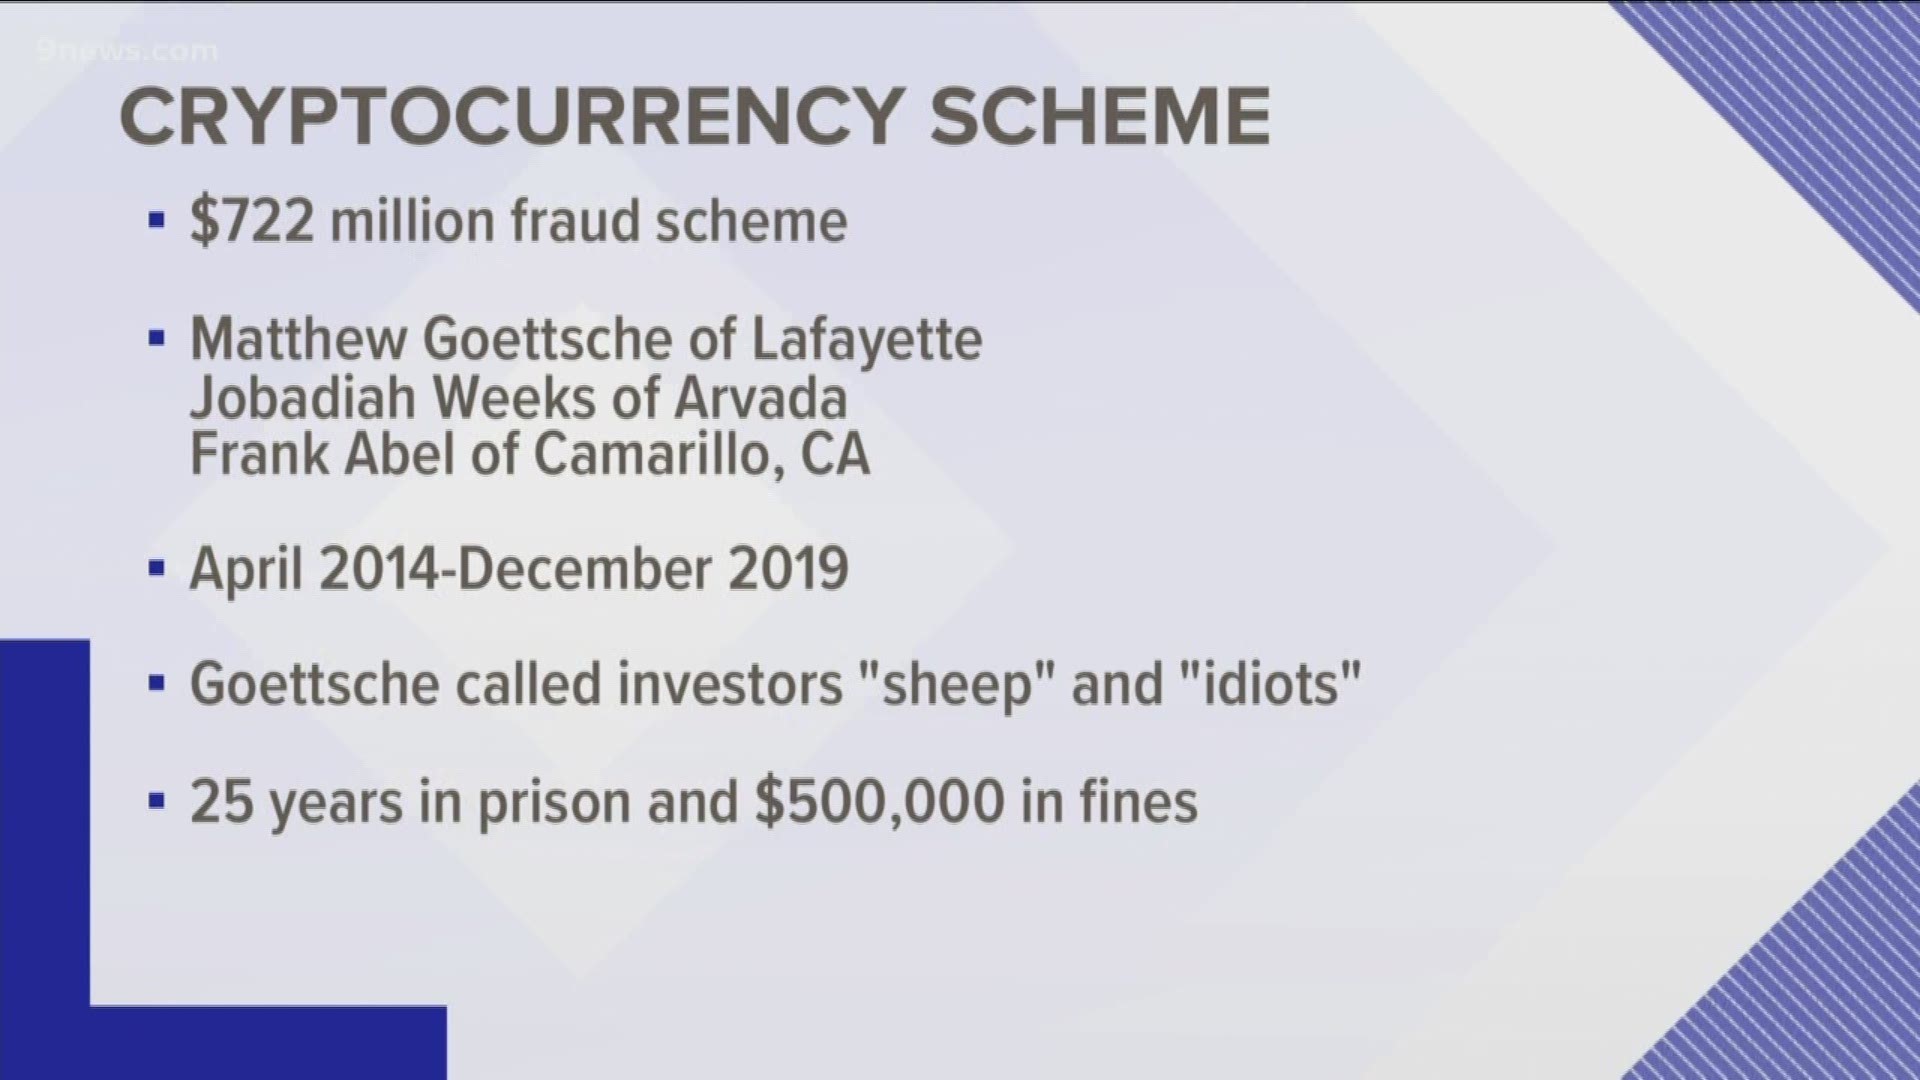 The pair, along with a third man, is accused of defrauding investors of $722 million, according to US Attorney Craig Carpenito.